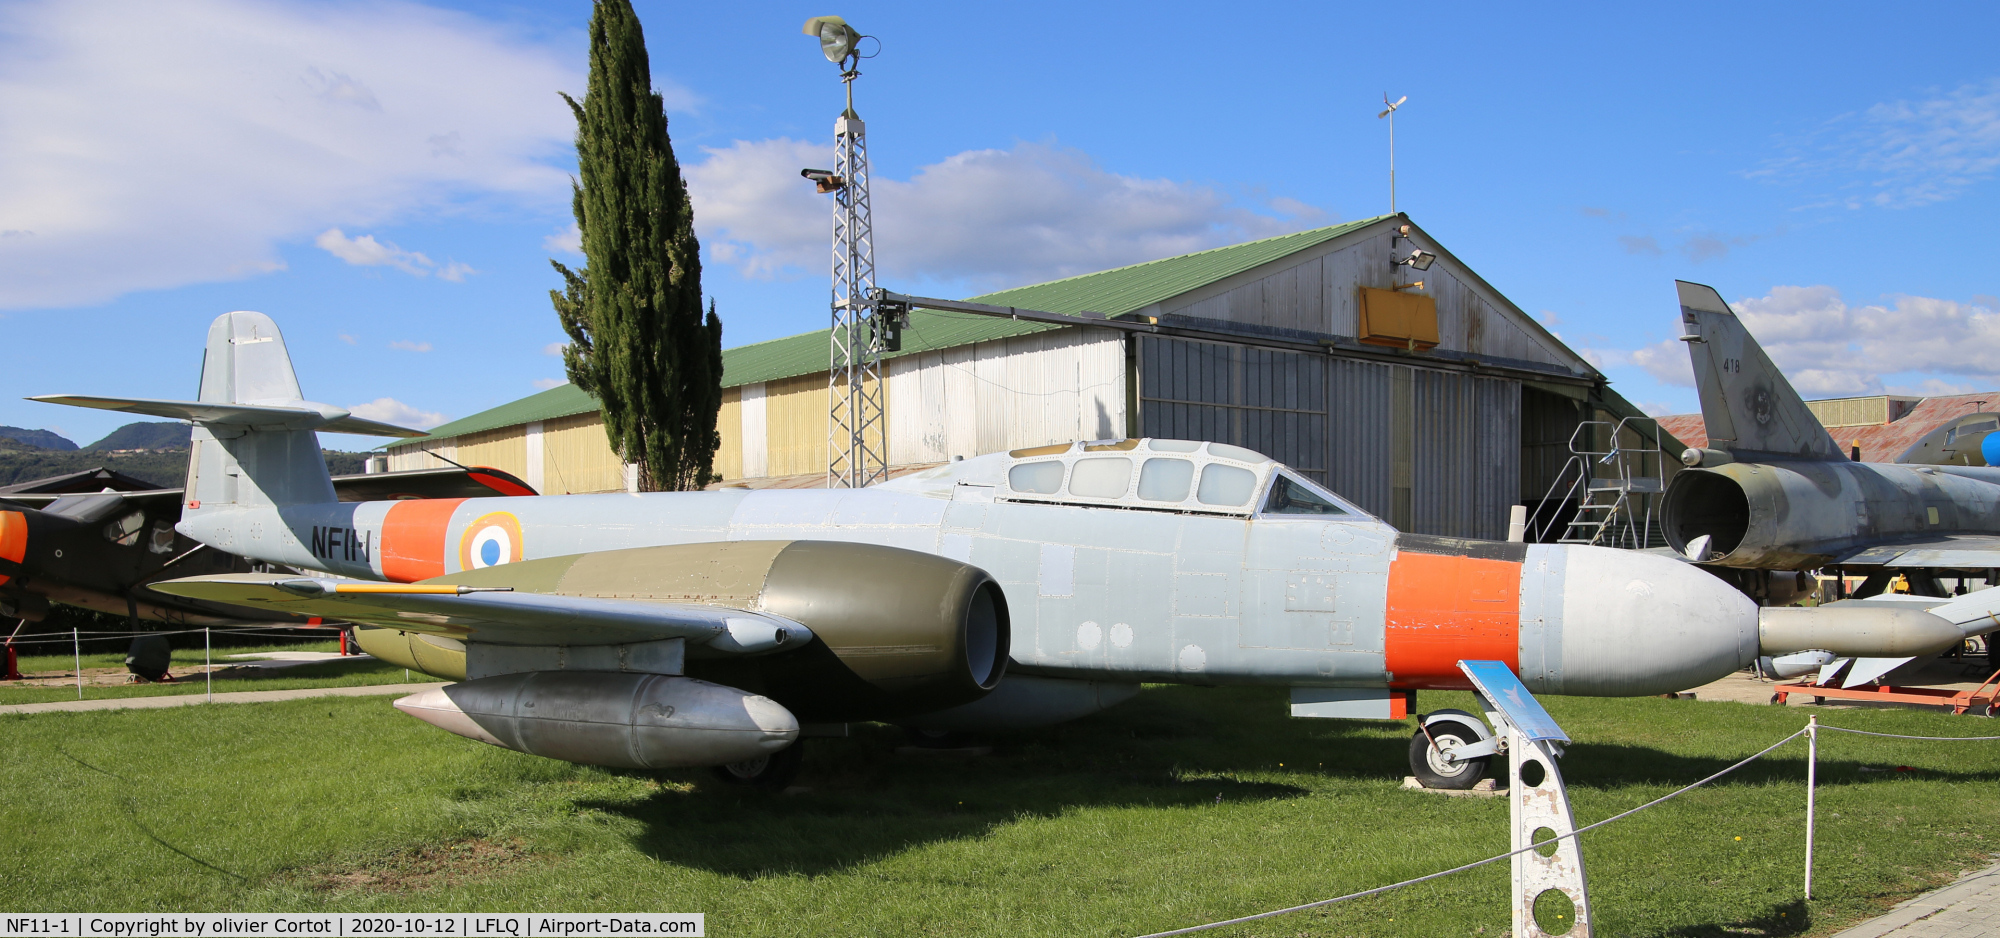 NF11-1, Gloster Meteor NF.11 C/N Not found NF11-1, oct 2020